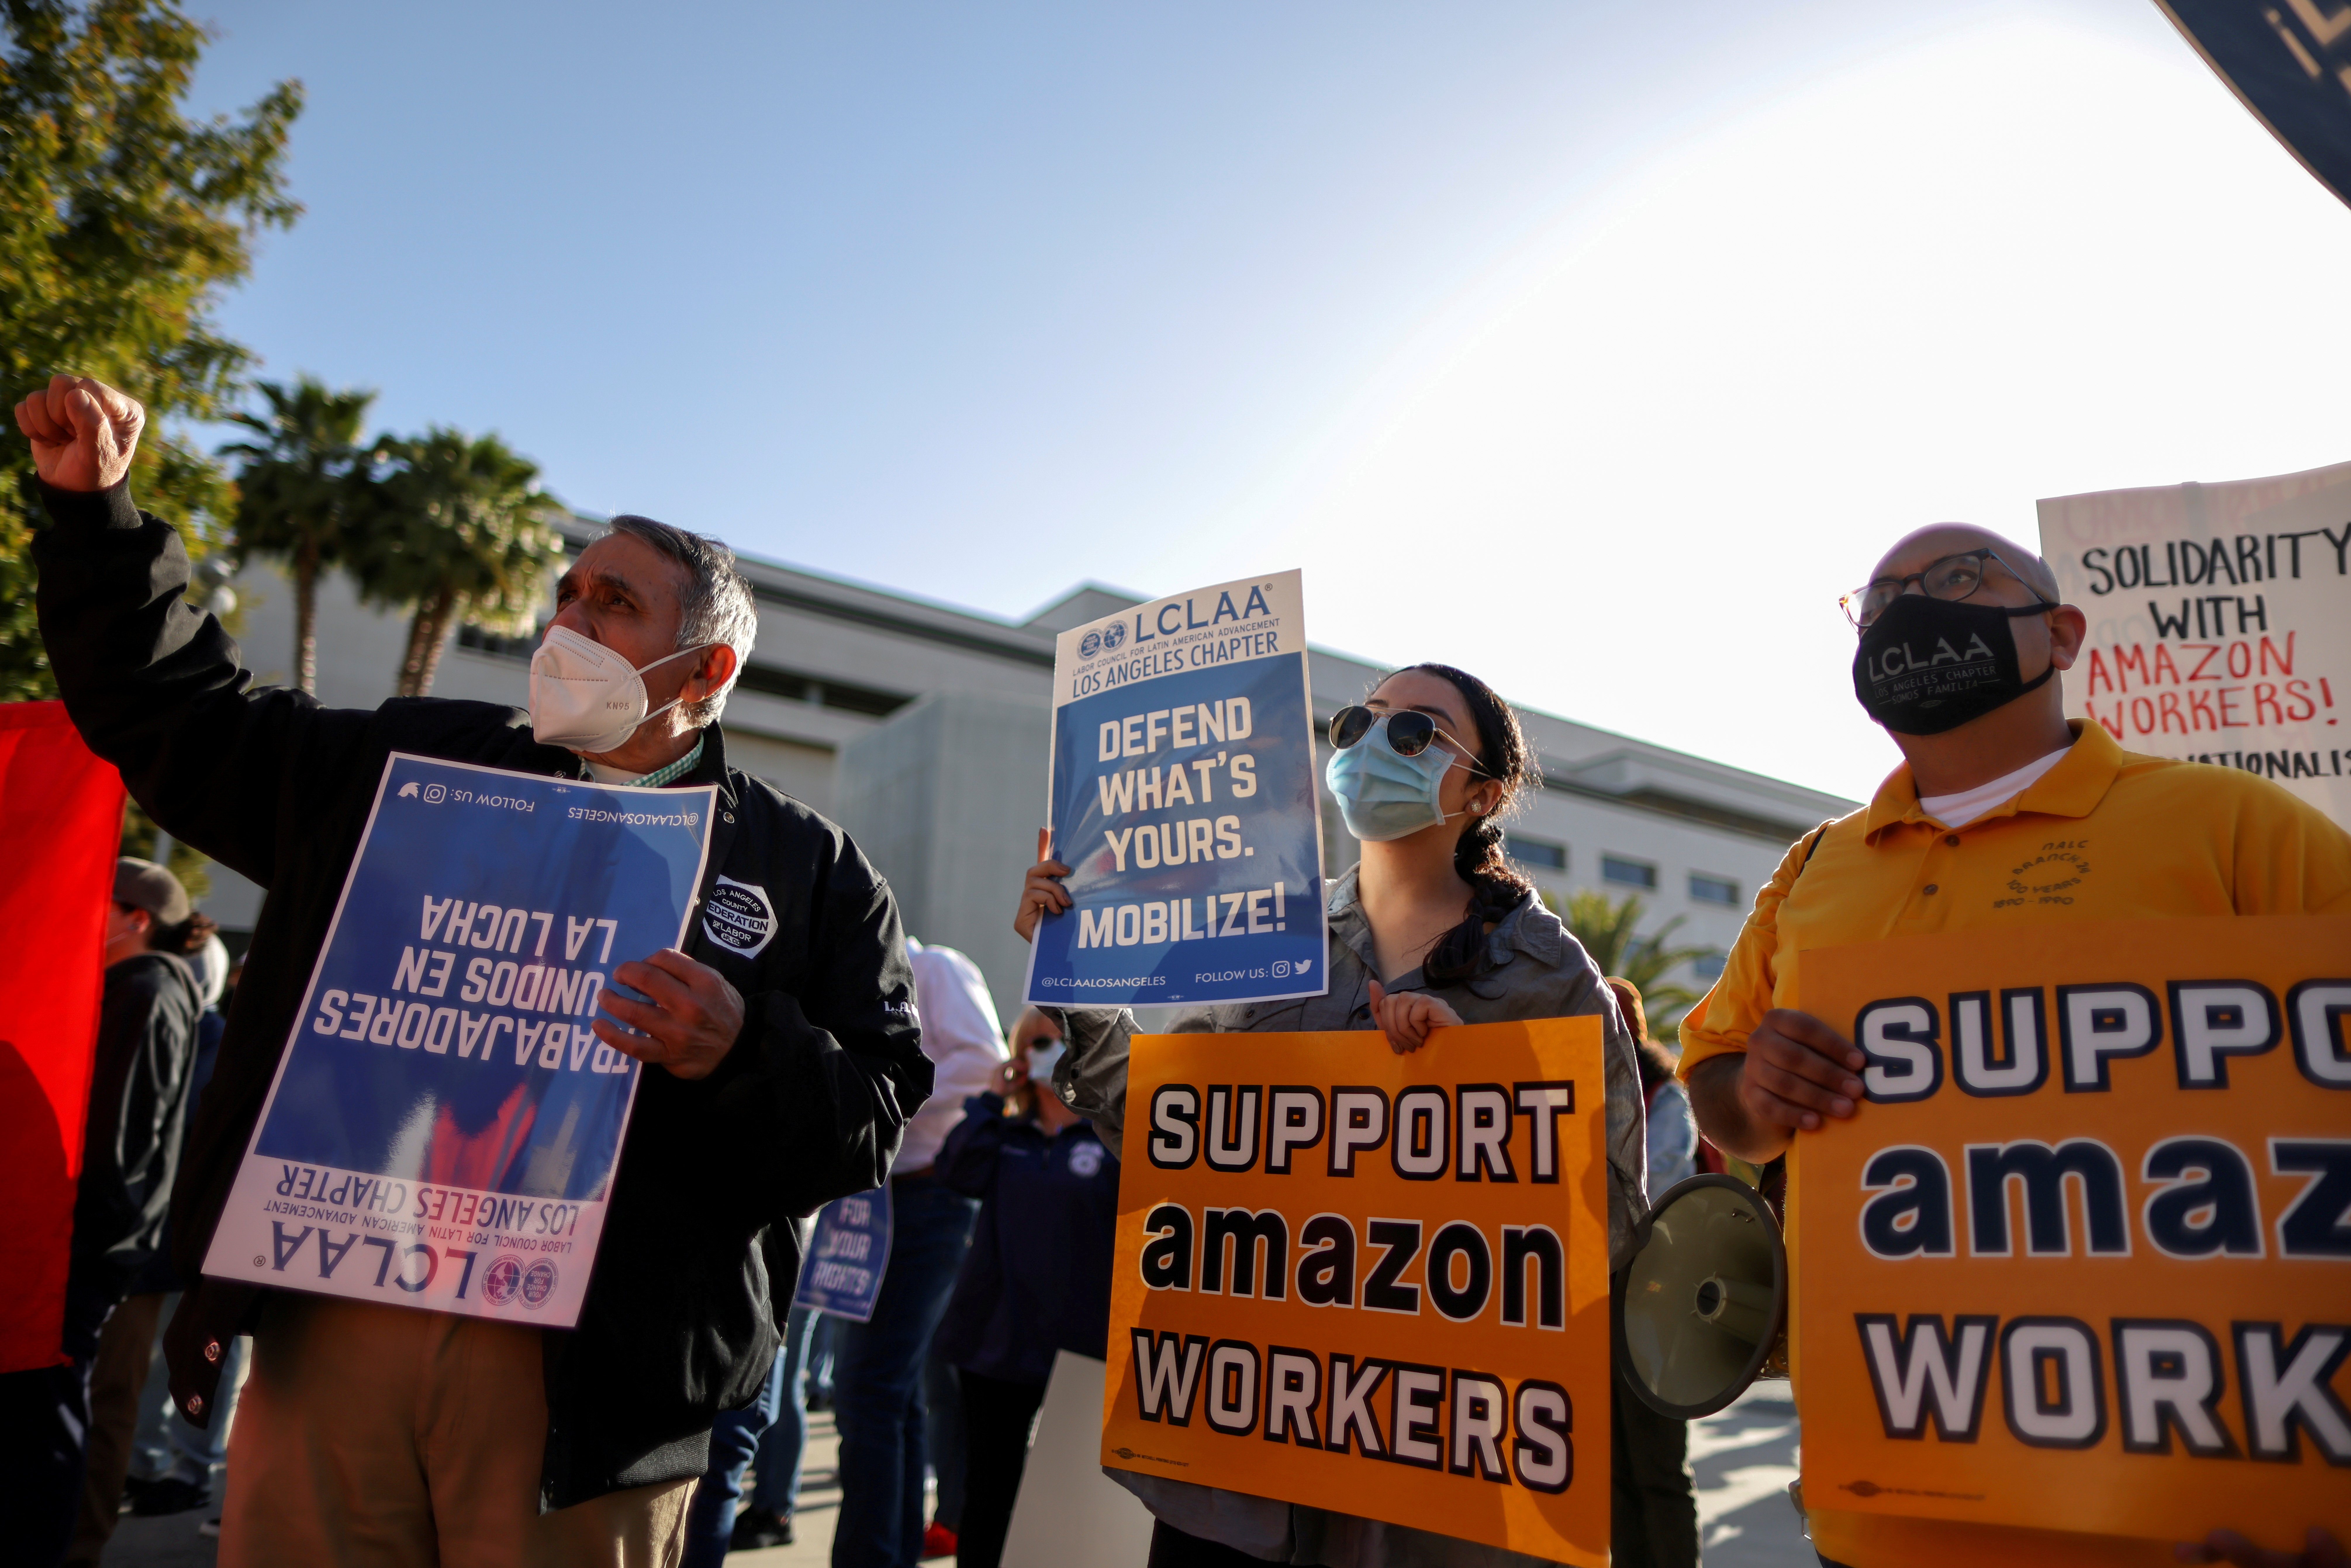 People protest in support of the unionizing efforts of the Alabama Amazon workers, in Los Angeles, California, U.S., March 22, 2021. REUTERS/Lucy Nicholson/File Photo